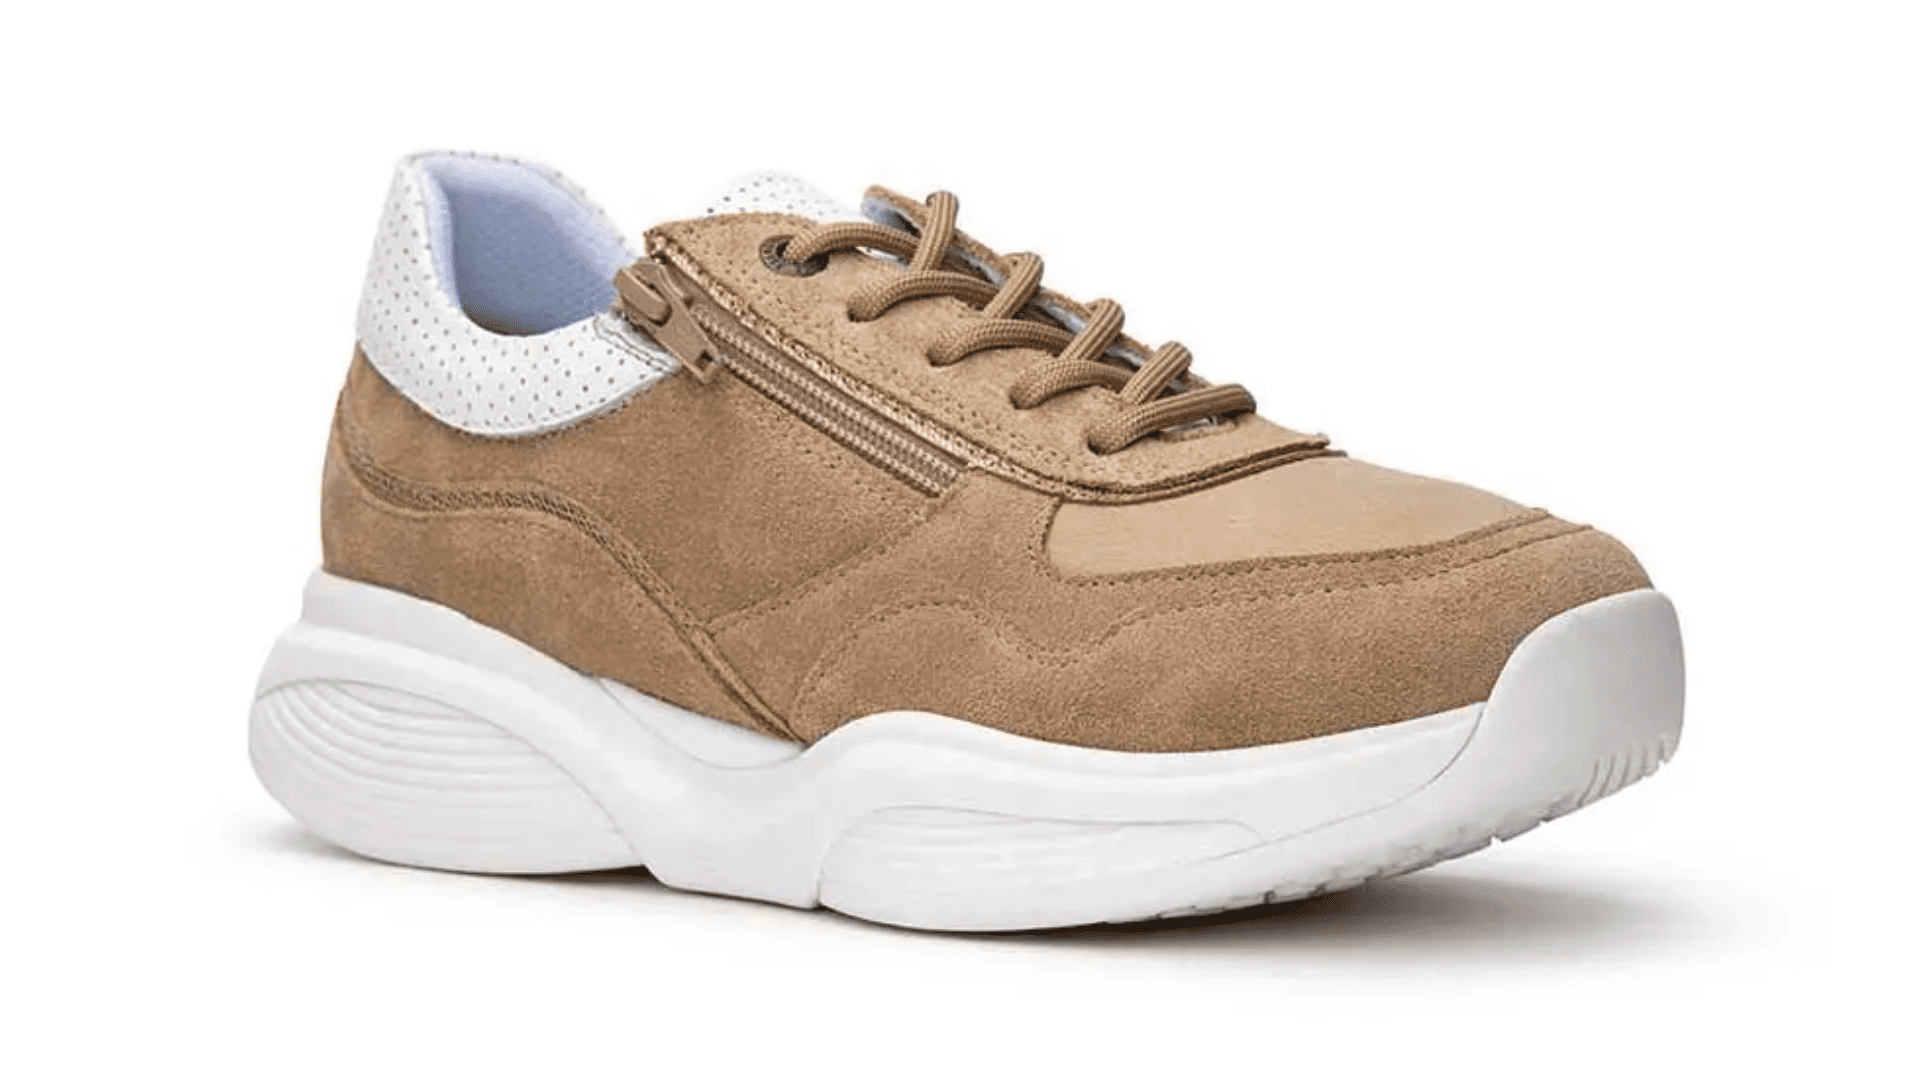 This Xsensible SWX11 in White/Caramel, is a women’s casual shoe boasting a side zip in addition to laces, to make it easier to slip in and out of. The shoes have extra width and a forefoot rocker to help relieve pain & discomfort caused by bunions.